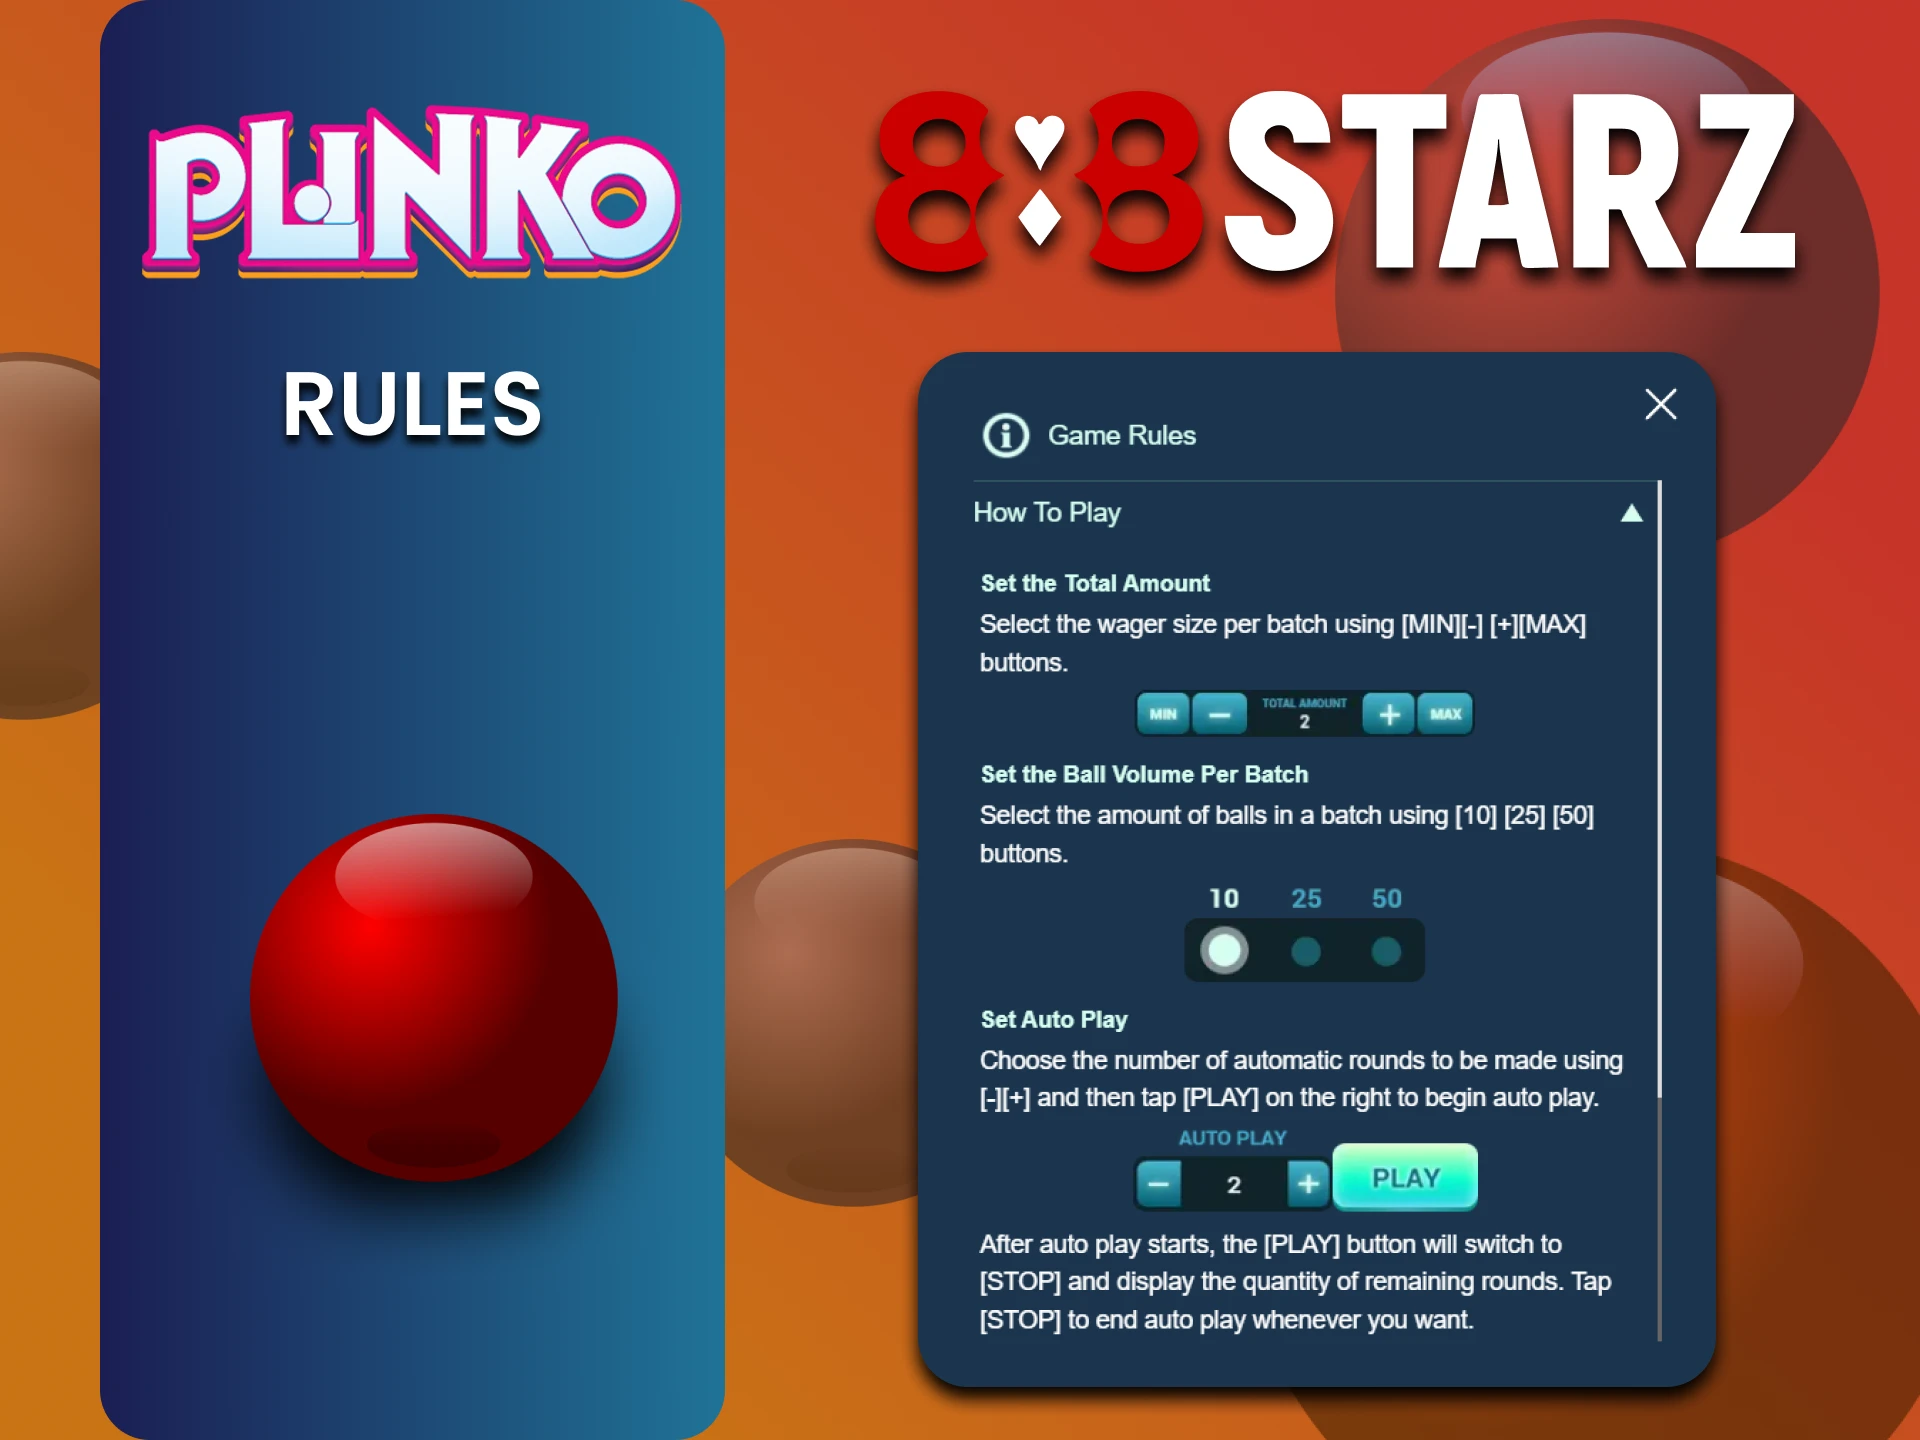 Learn the rules for winning Plinko at 888starz.